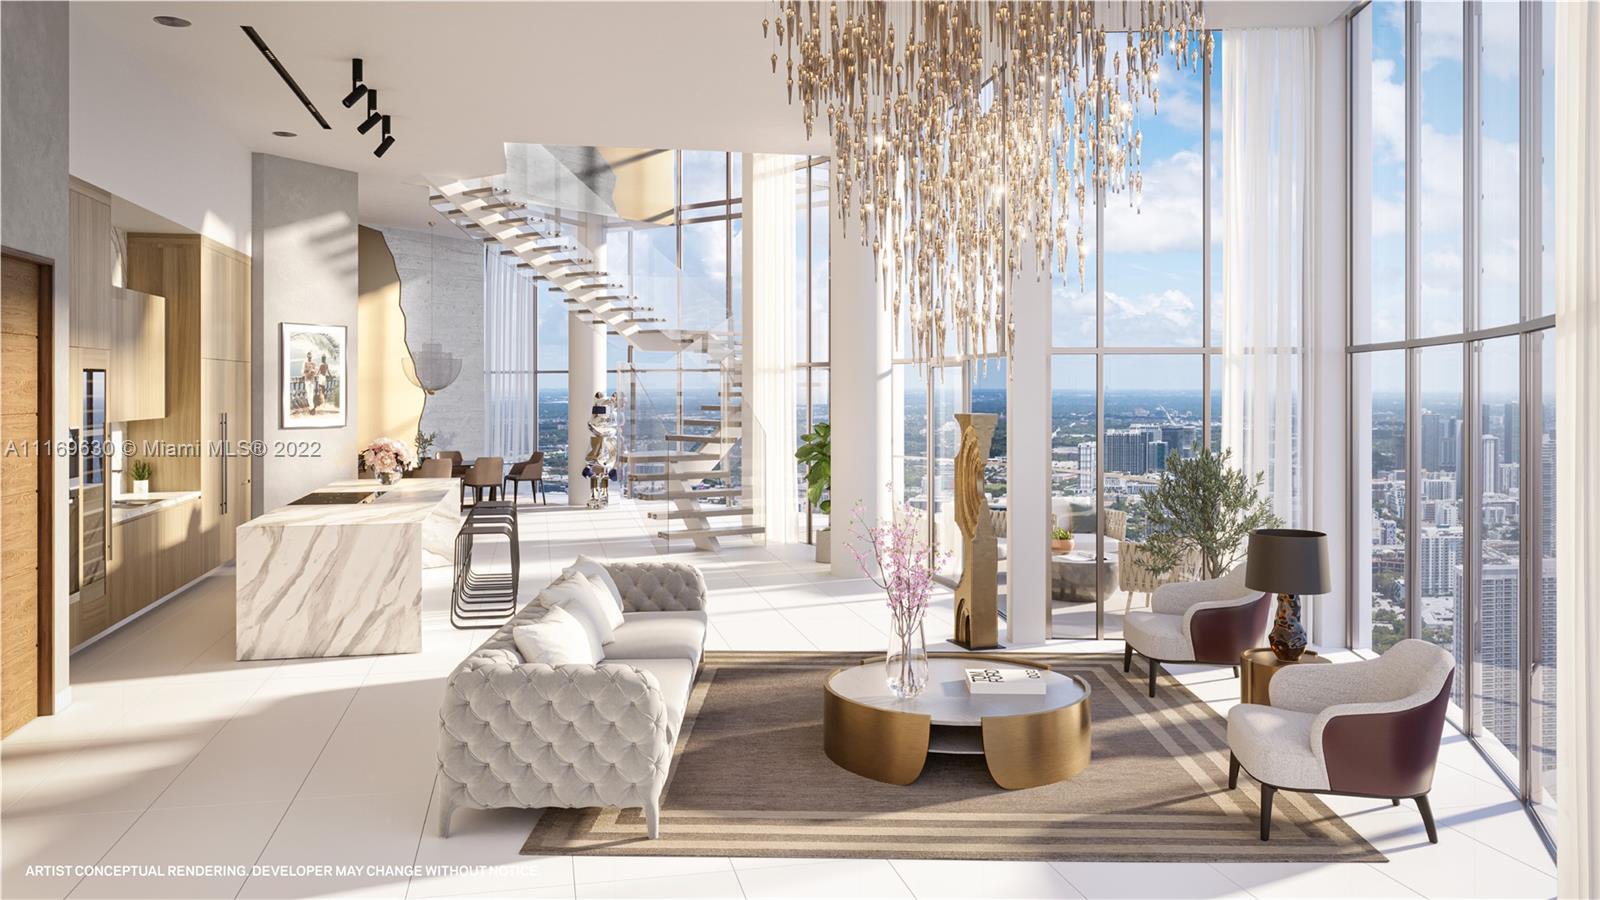 Located within Miami Worldcenter, the second largest master planned community in the U.S., PARAMOUNT